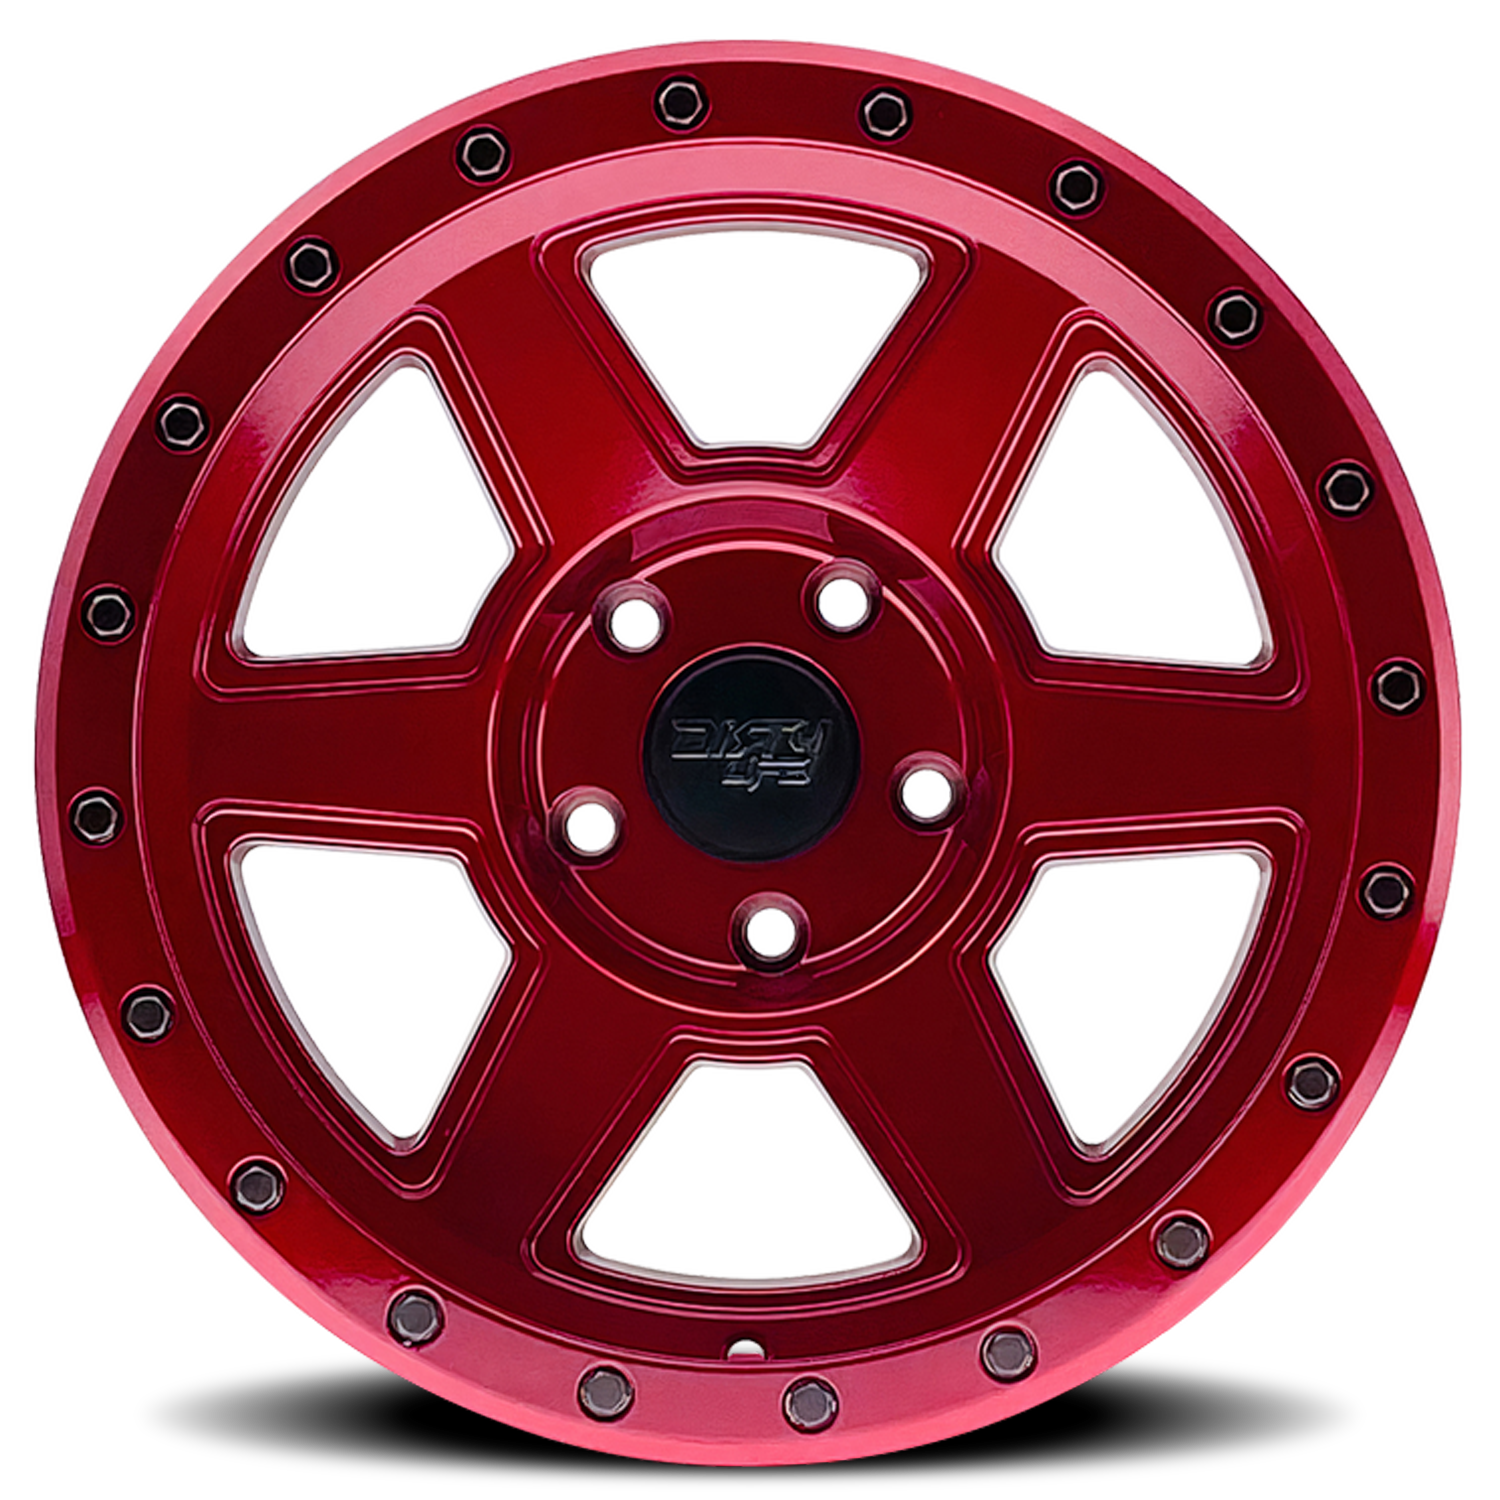 https://storage.googleapis.com/autosync-wheels/Dirty_Life_Race_Wheels/Compound_9315-RD_Crimson-Candy-Red_5-lug_0003.png